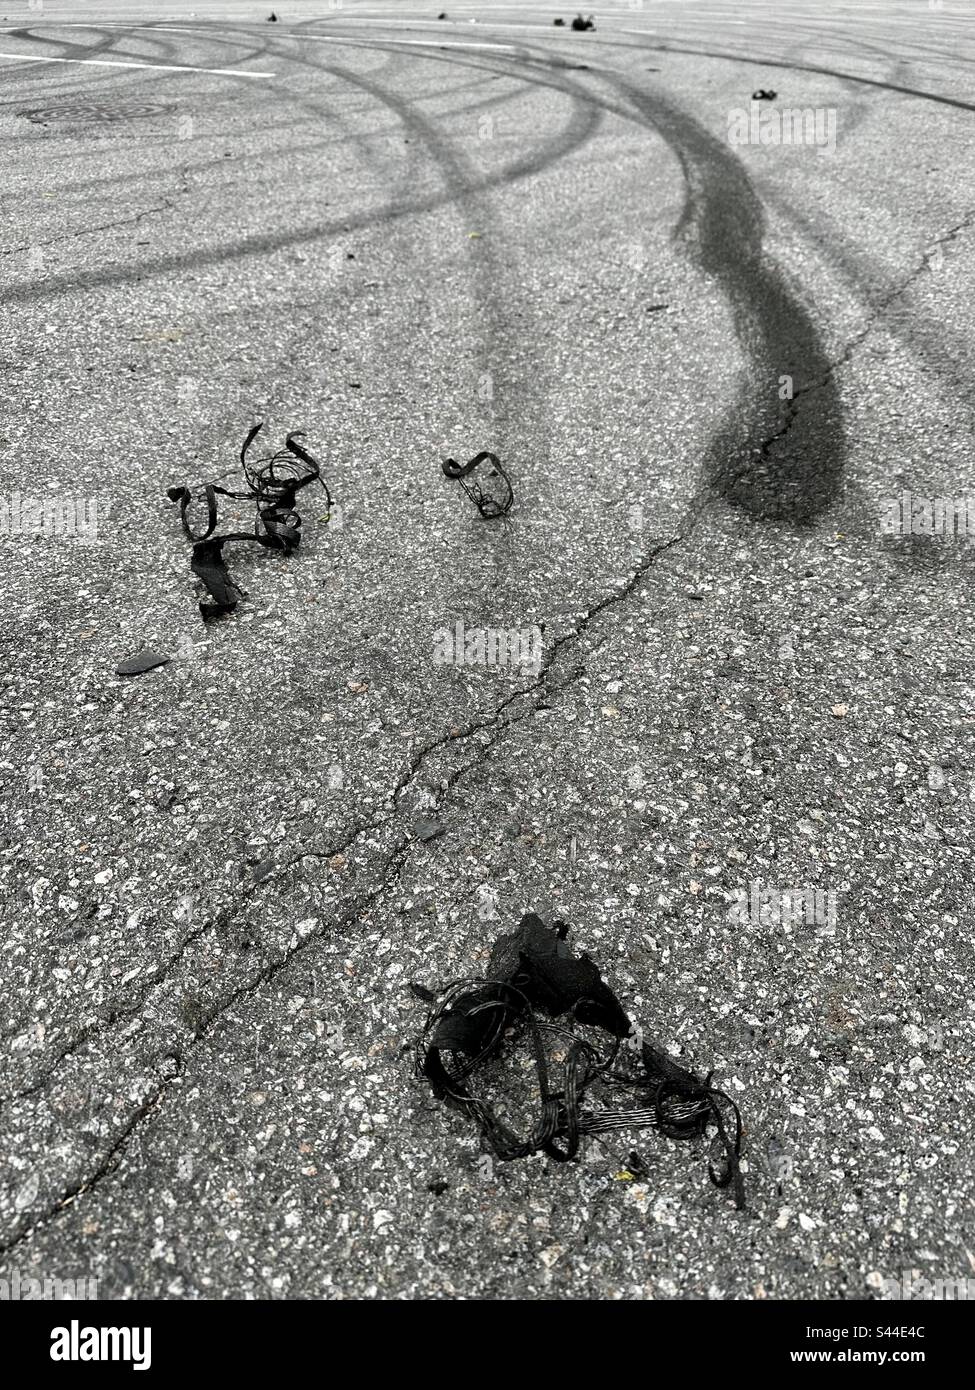 Car tire marks and pieces on a parking lot Stock Photo